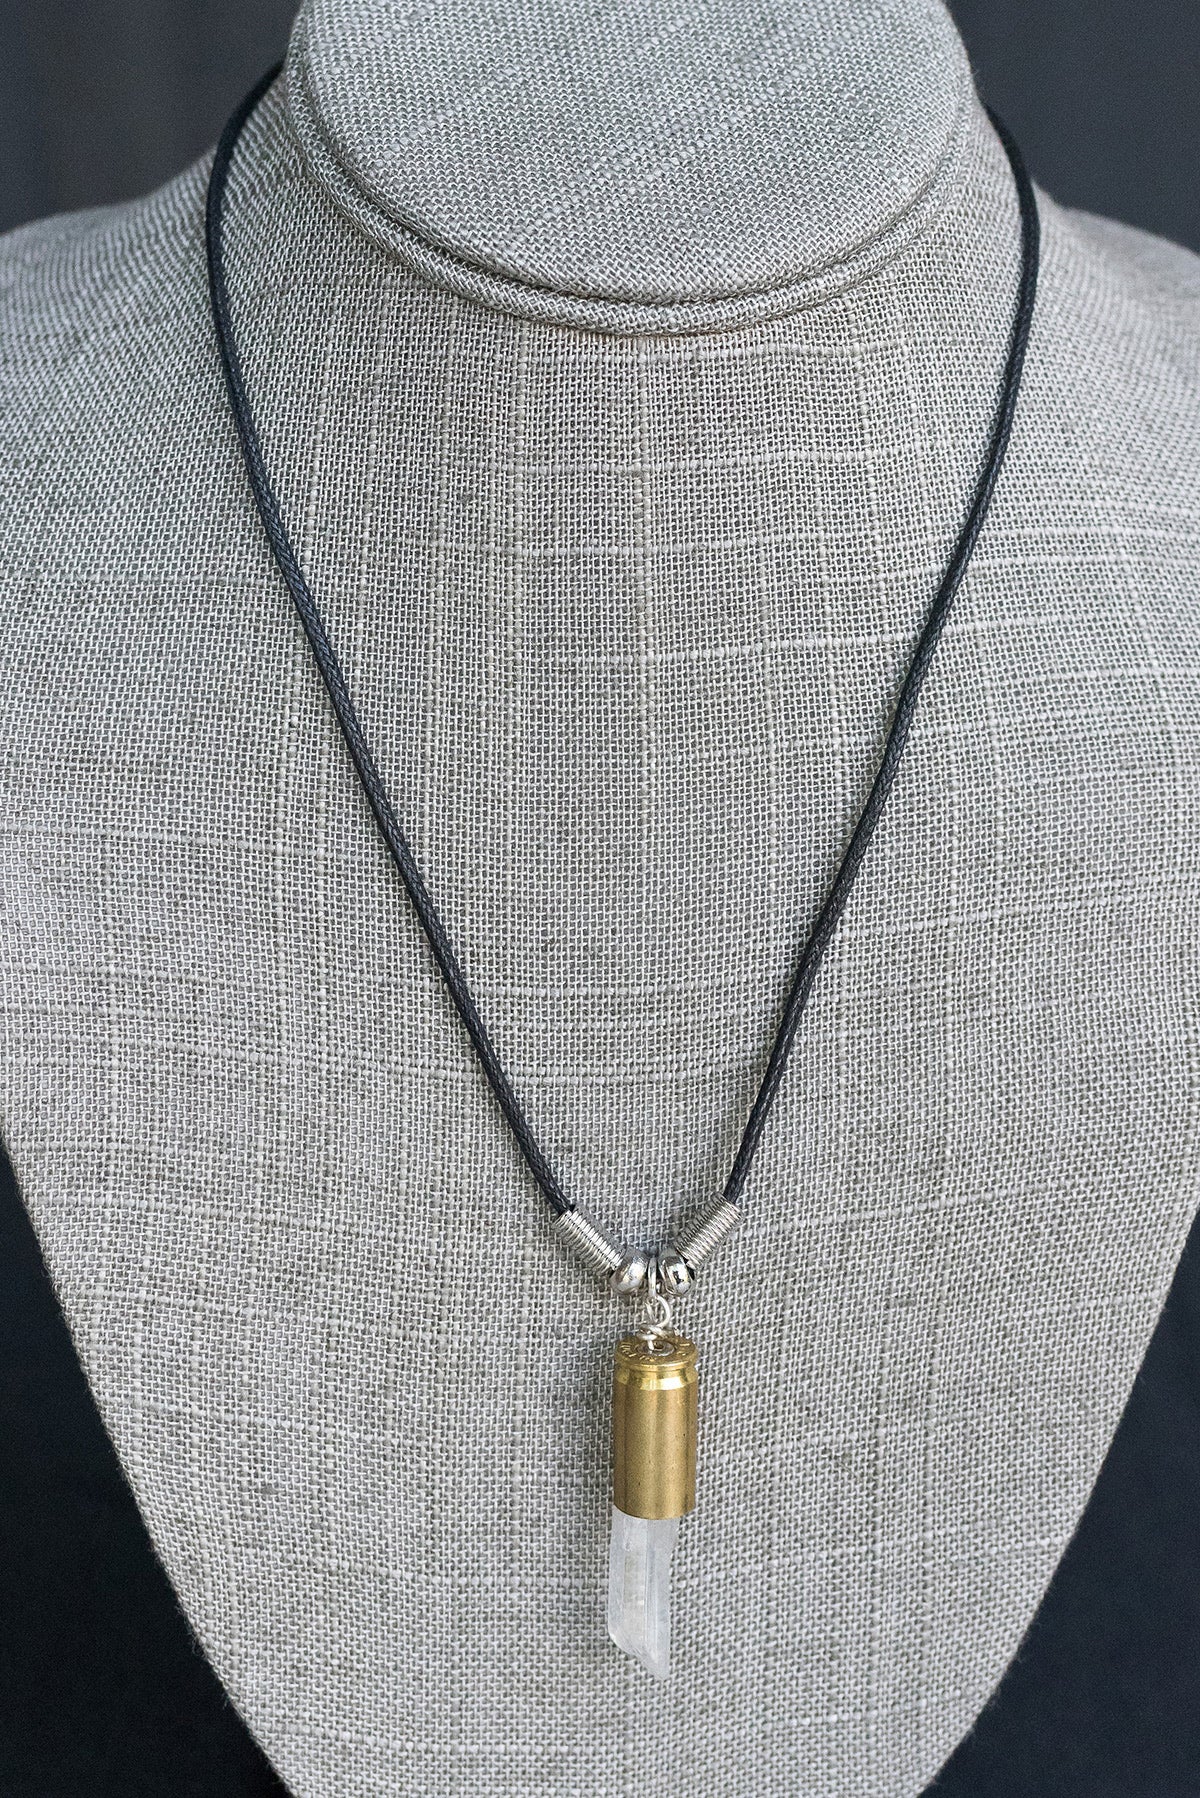 Clear Crystal Teardrop Bullet Pendant on Leather Rope